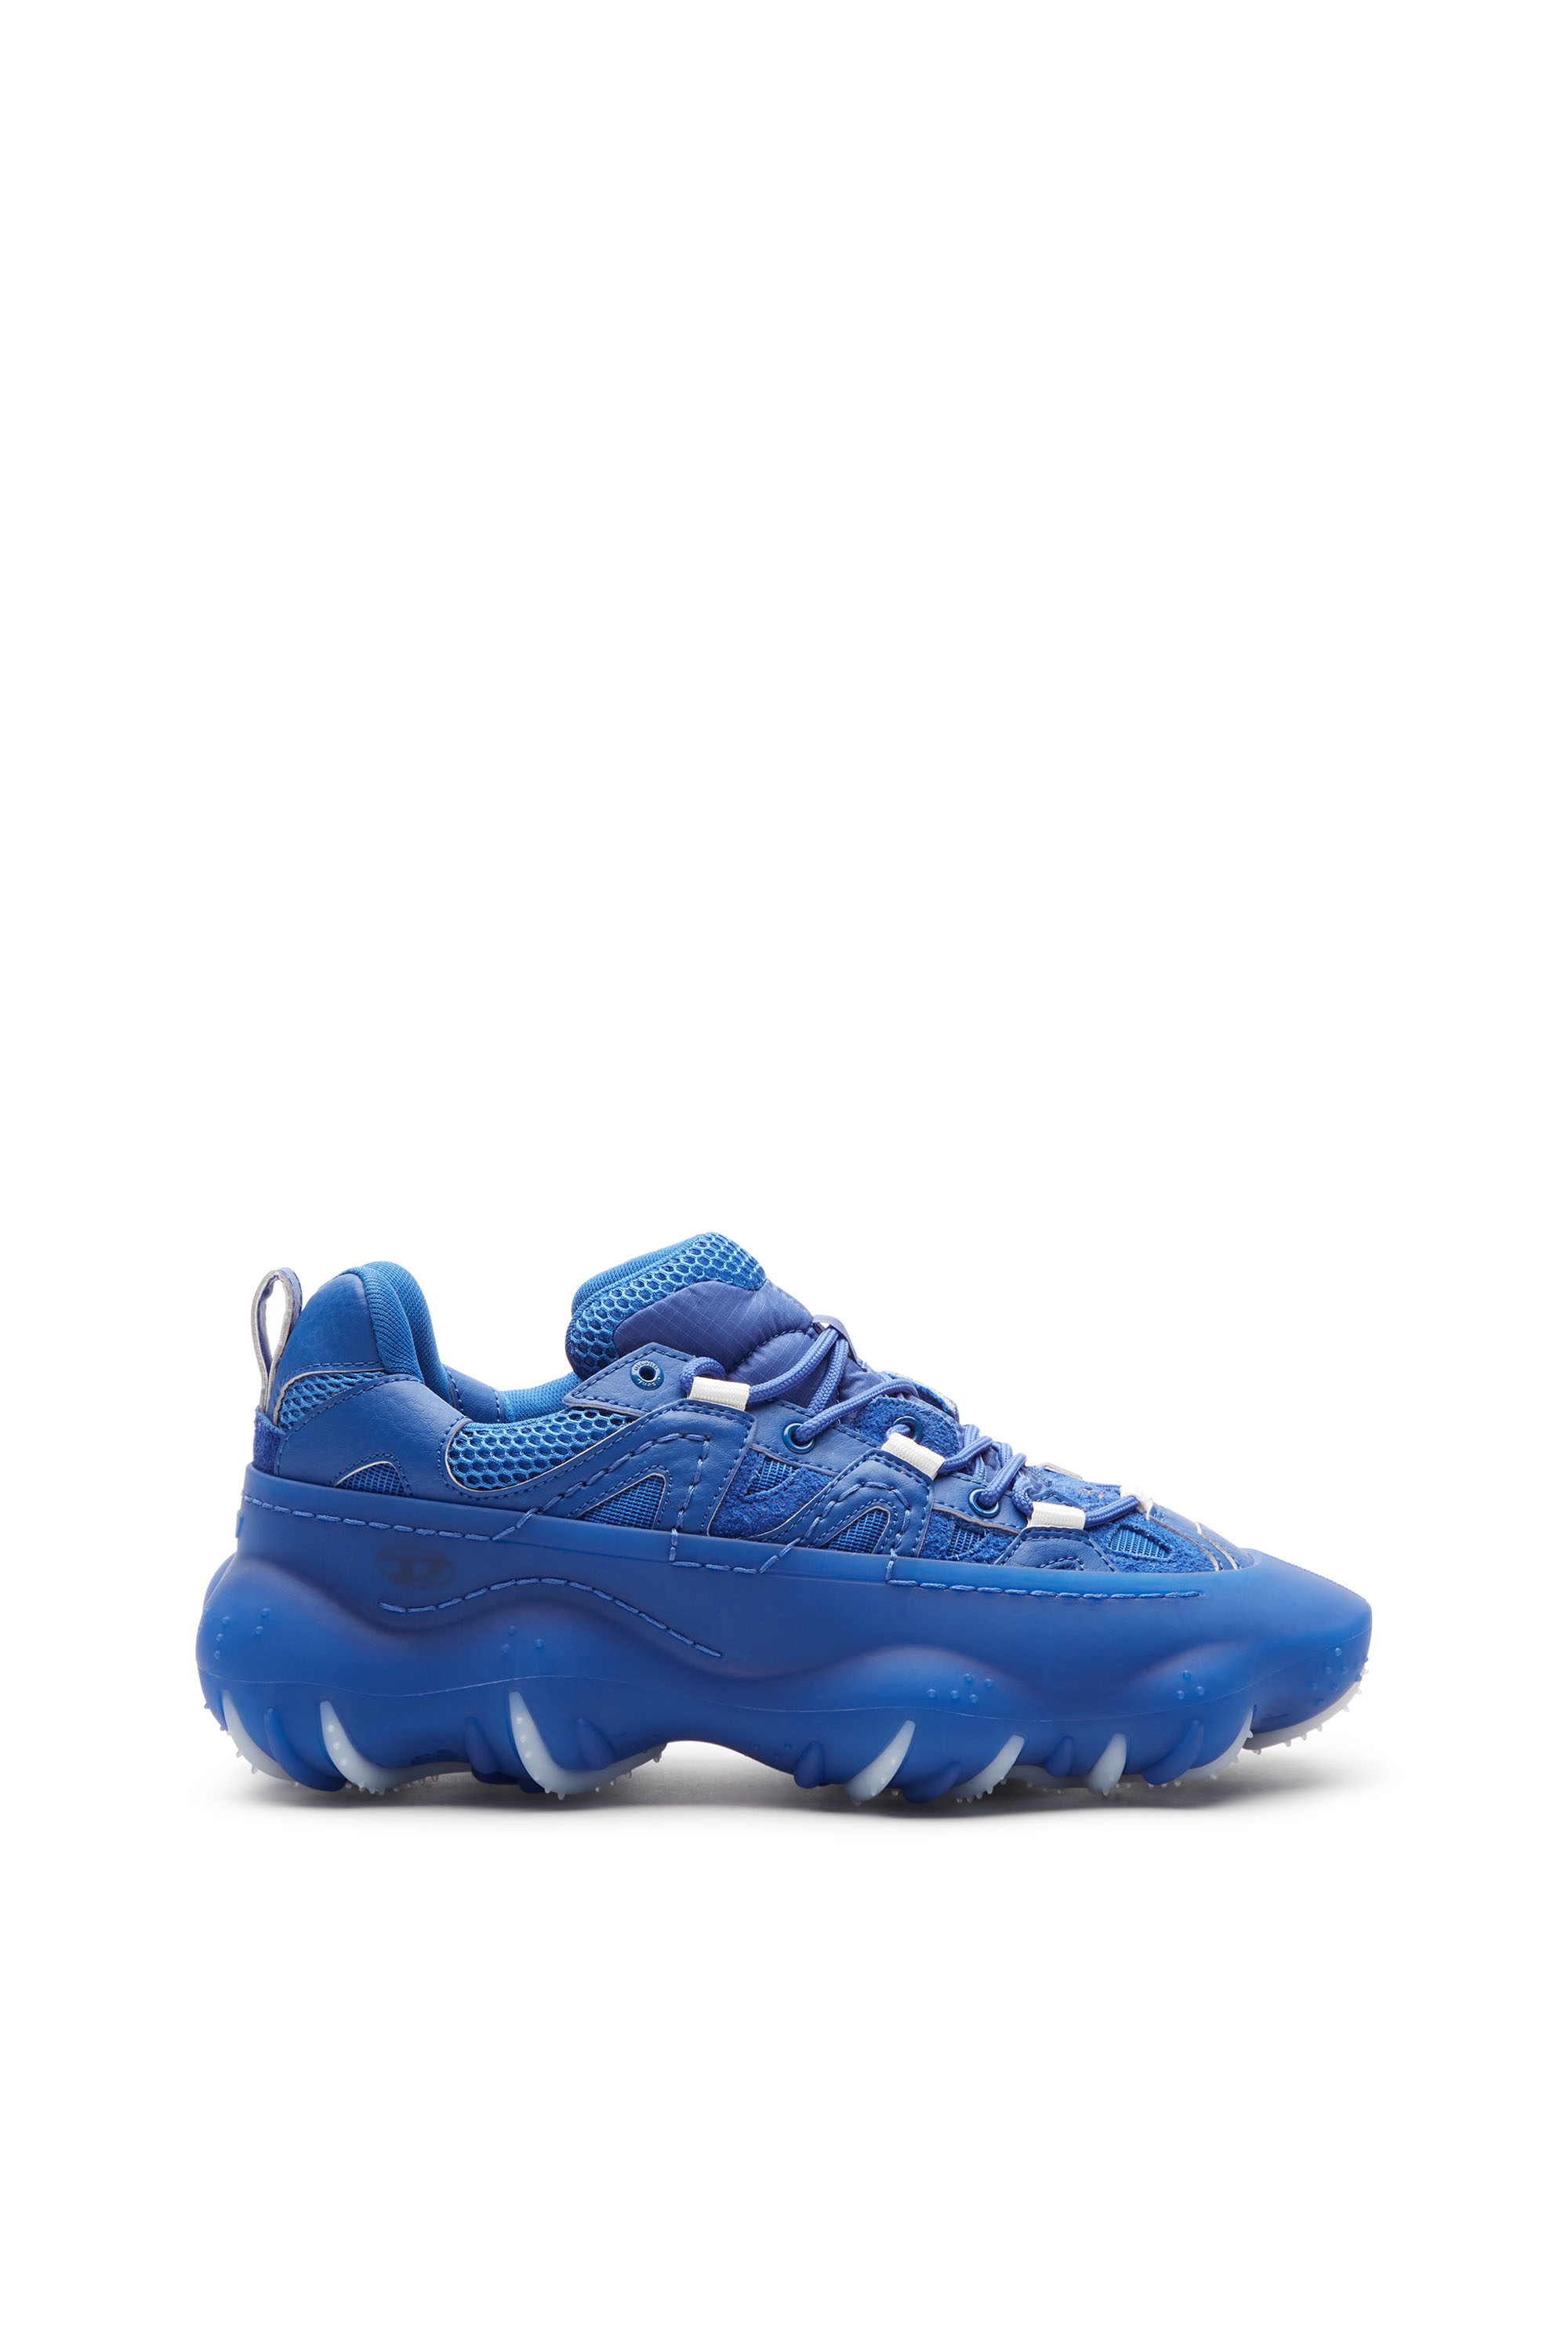 Diesel - S-PROTOTYPE P1, Man S-Prototype P1-Low-top sneakers with rubber overlay in Blue - Image 1